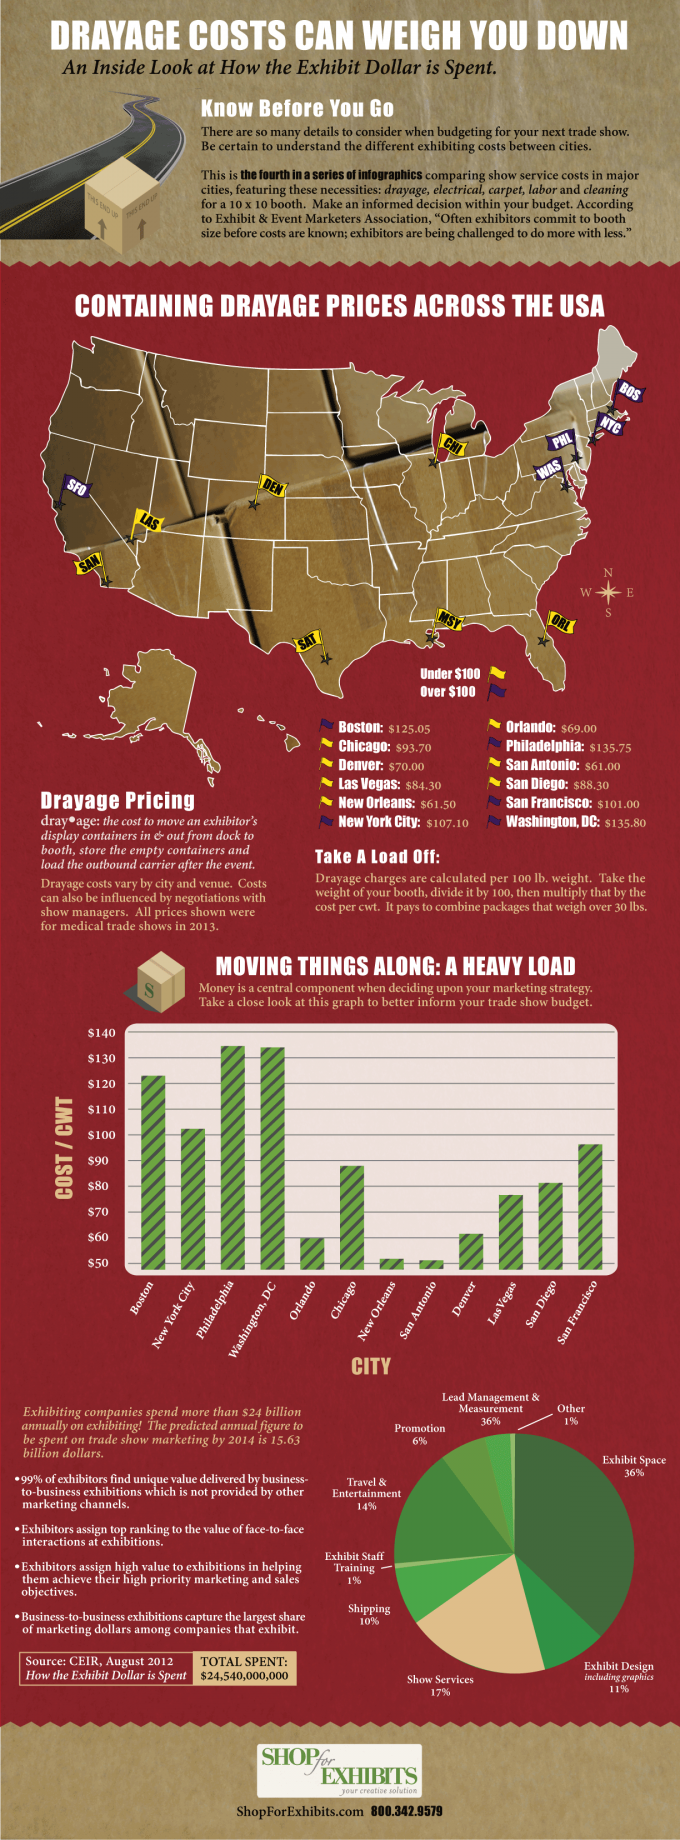 Trade Show Drayage Costs Infographic